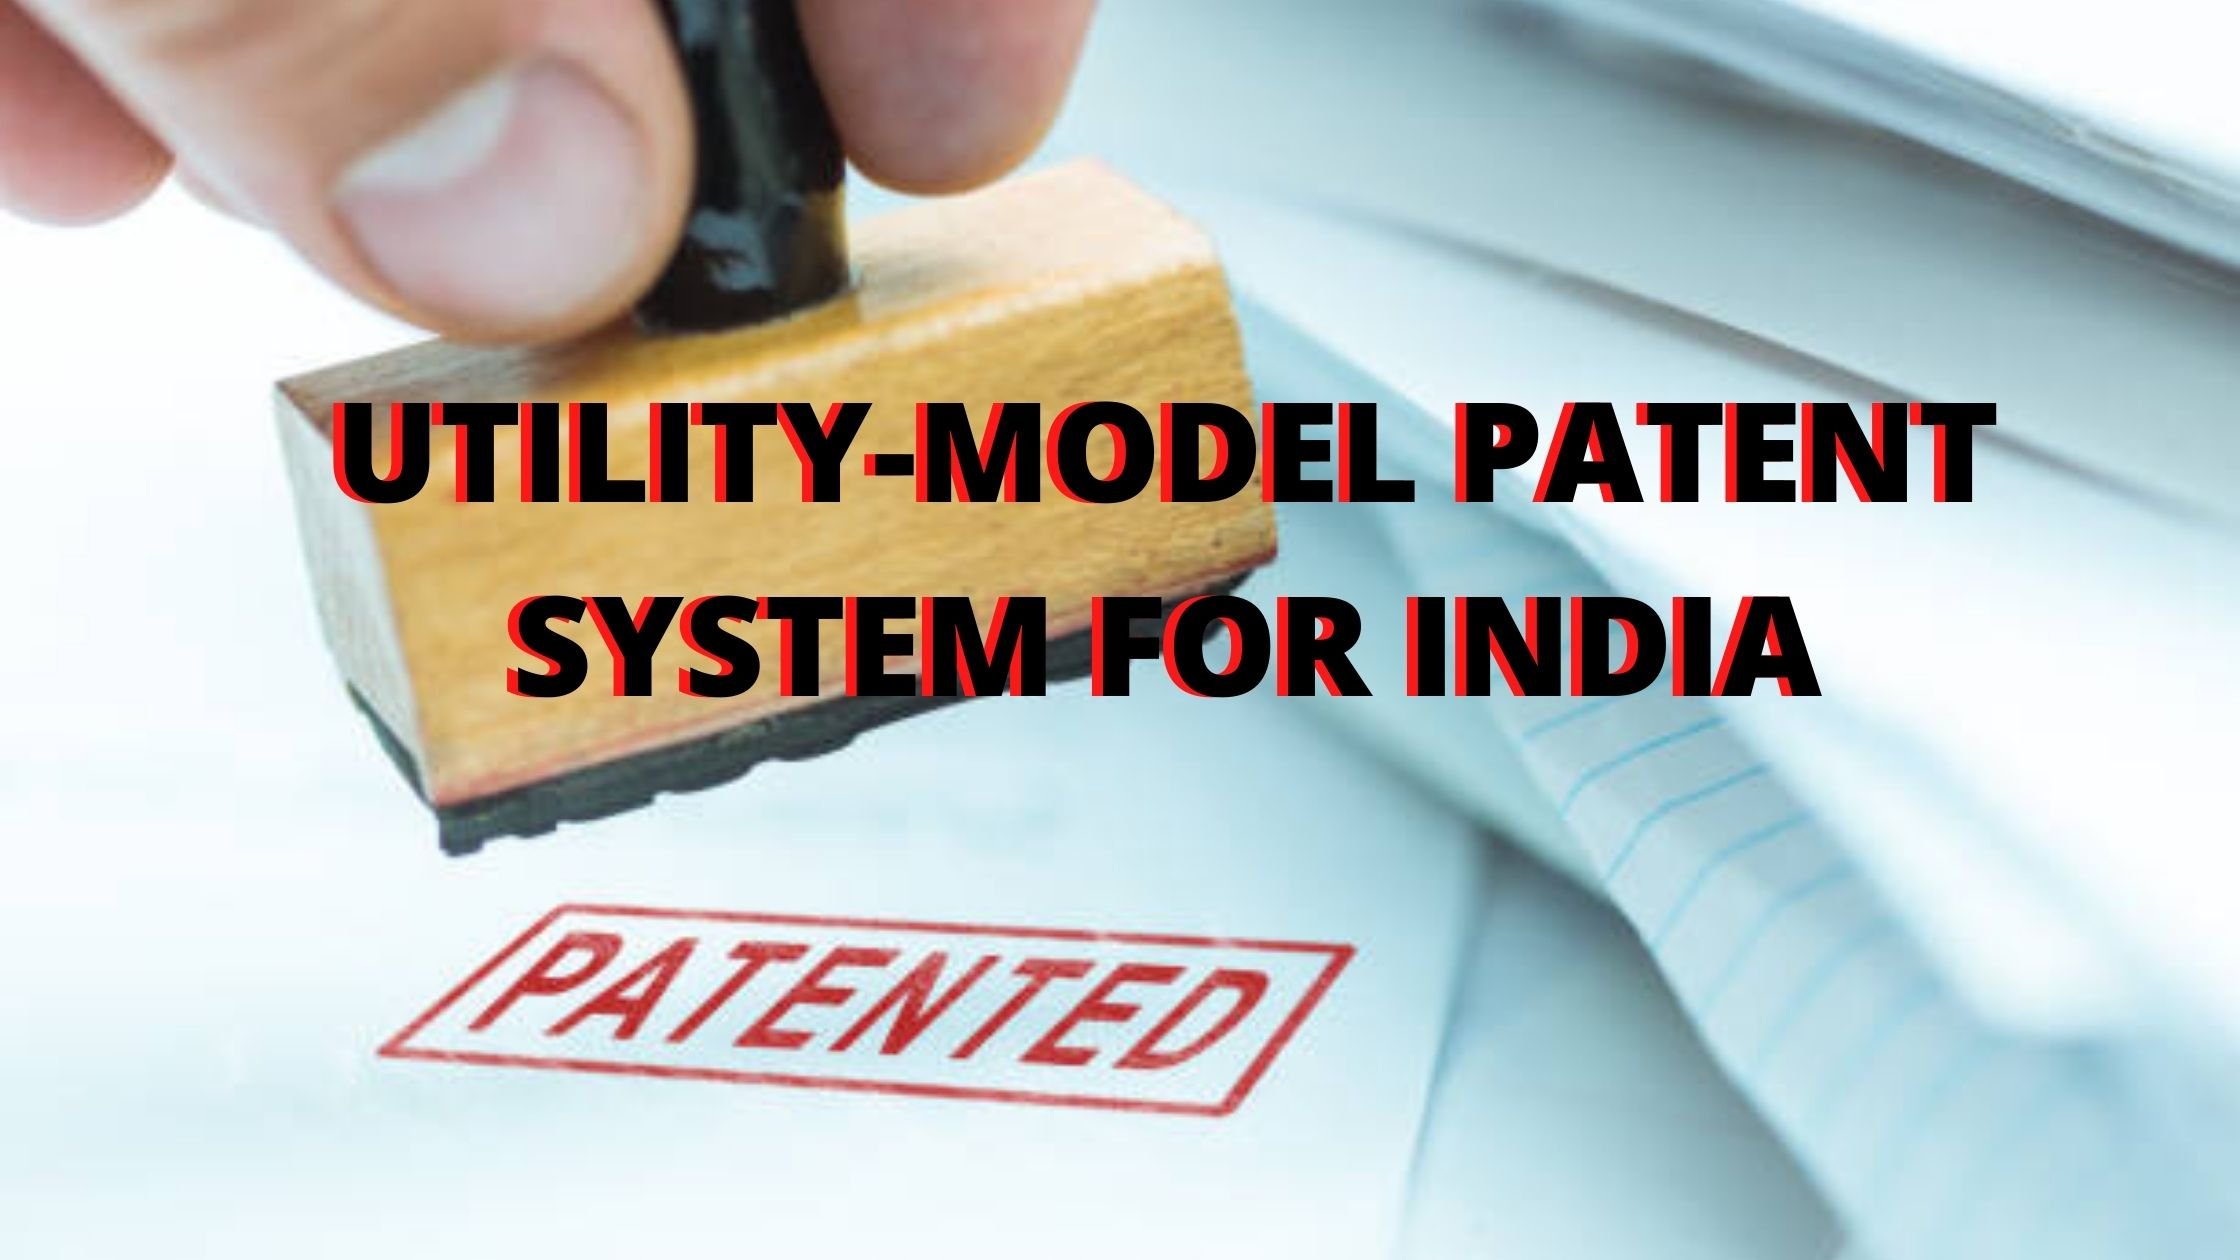 UTILITY MODEL PATENT SYSTEM FOR INDIA